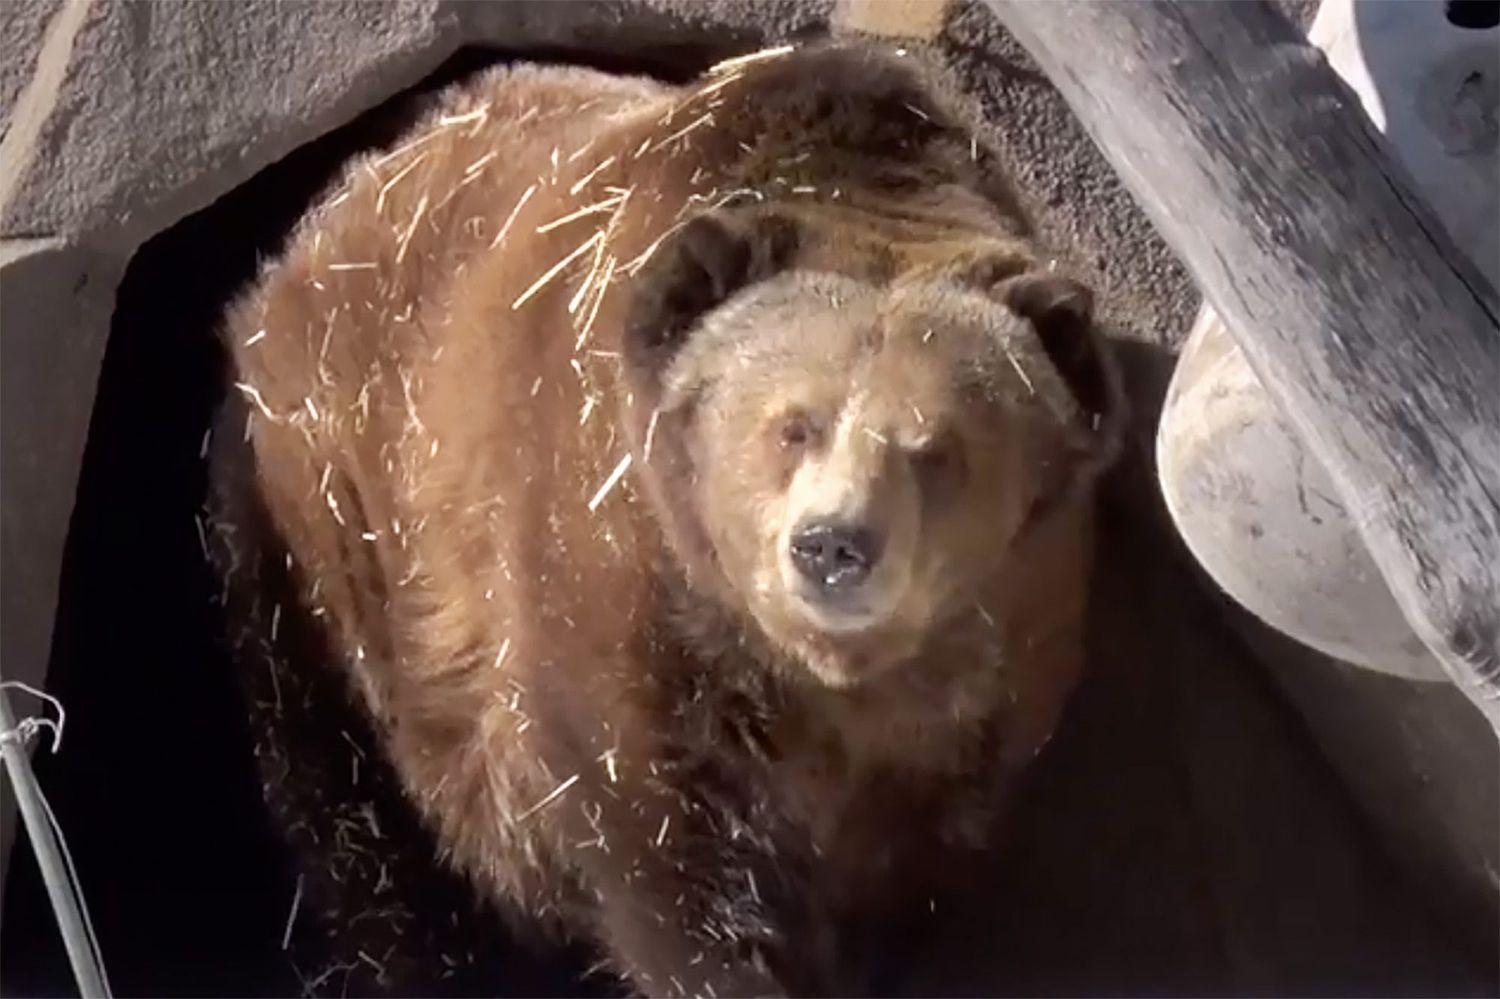 Grizzly Bear at the Milwaukee Zoo Briefly Wakes up From Hibernation in  Adorable Video | Daily Paws